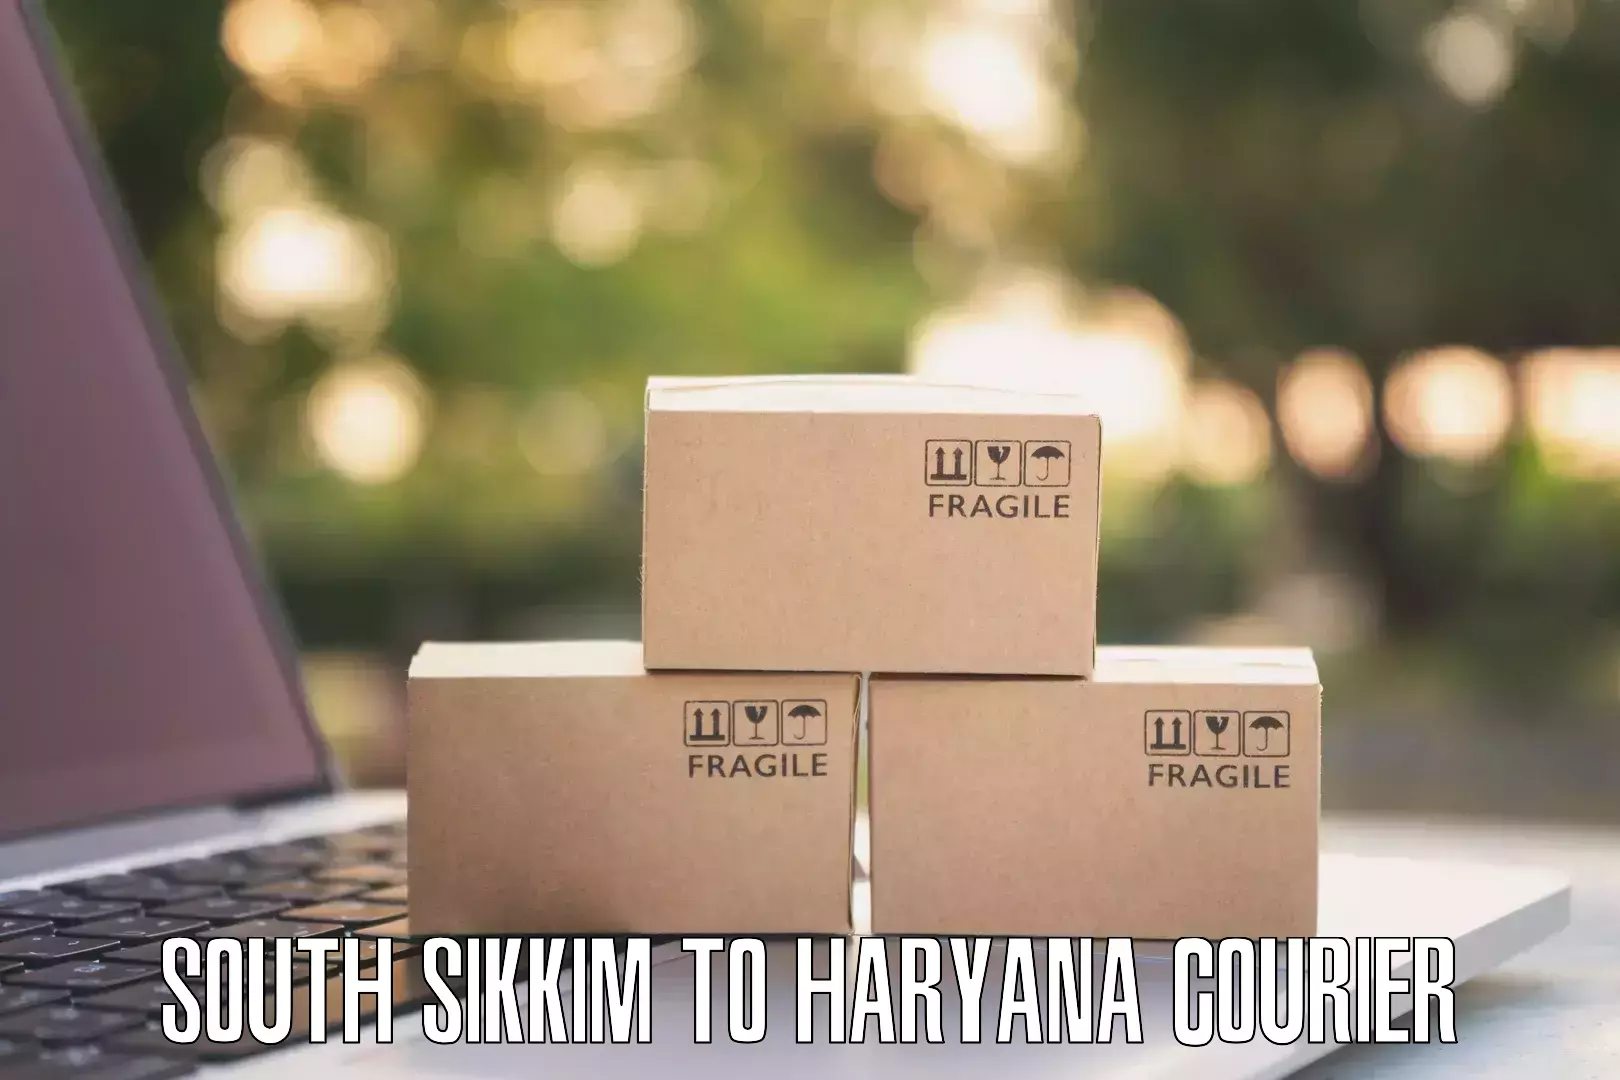 Easy access courier services South Sikkim to Kalanwali